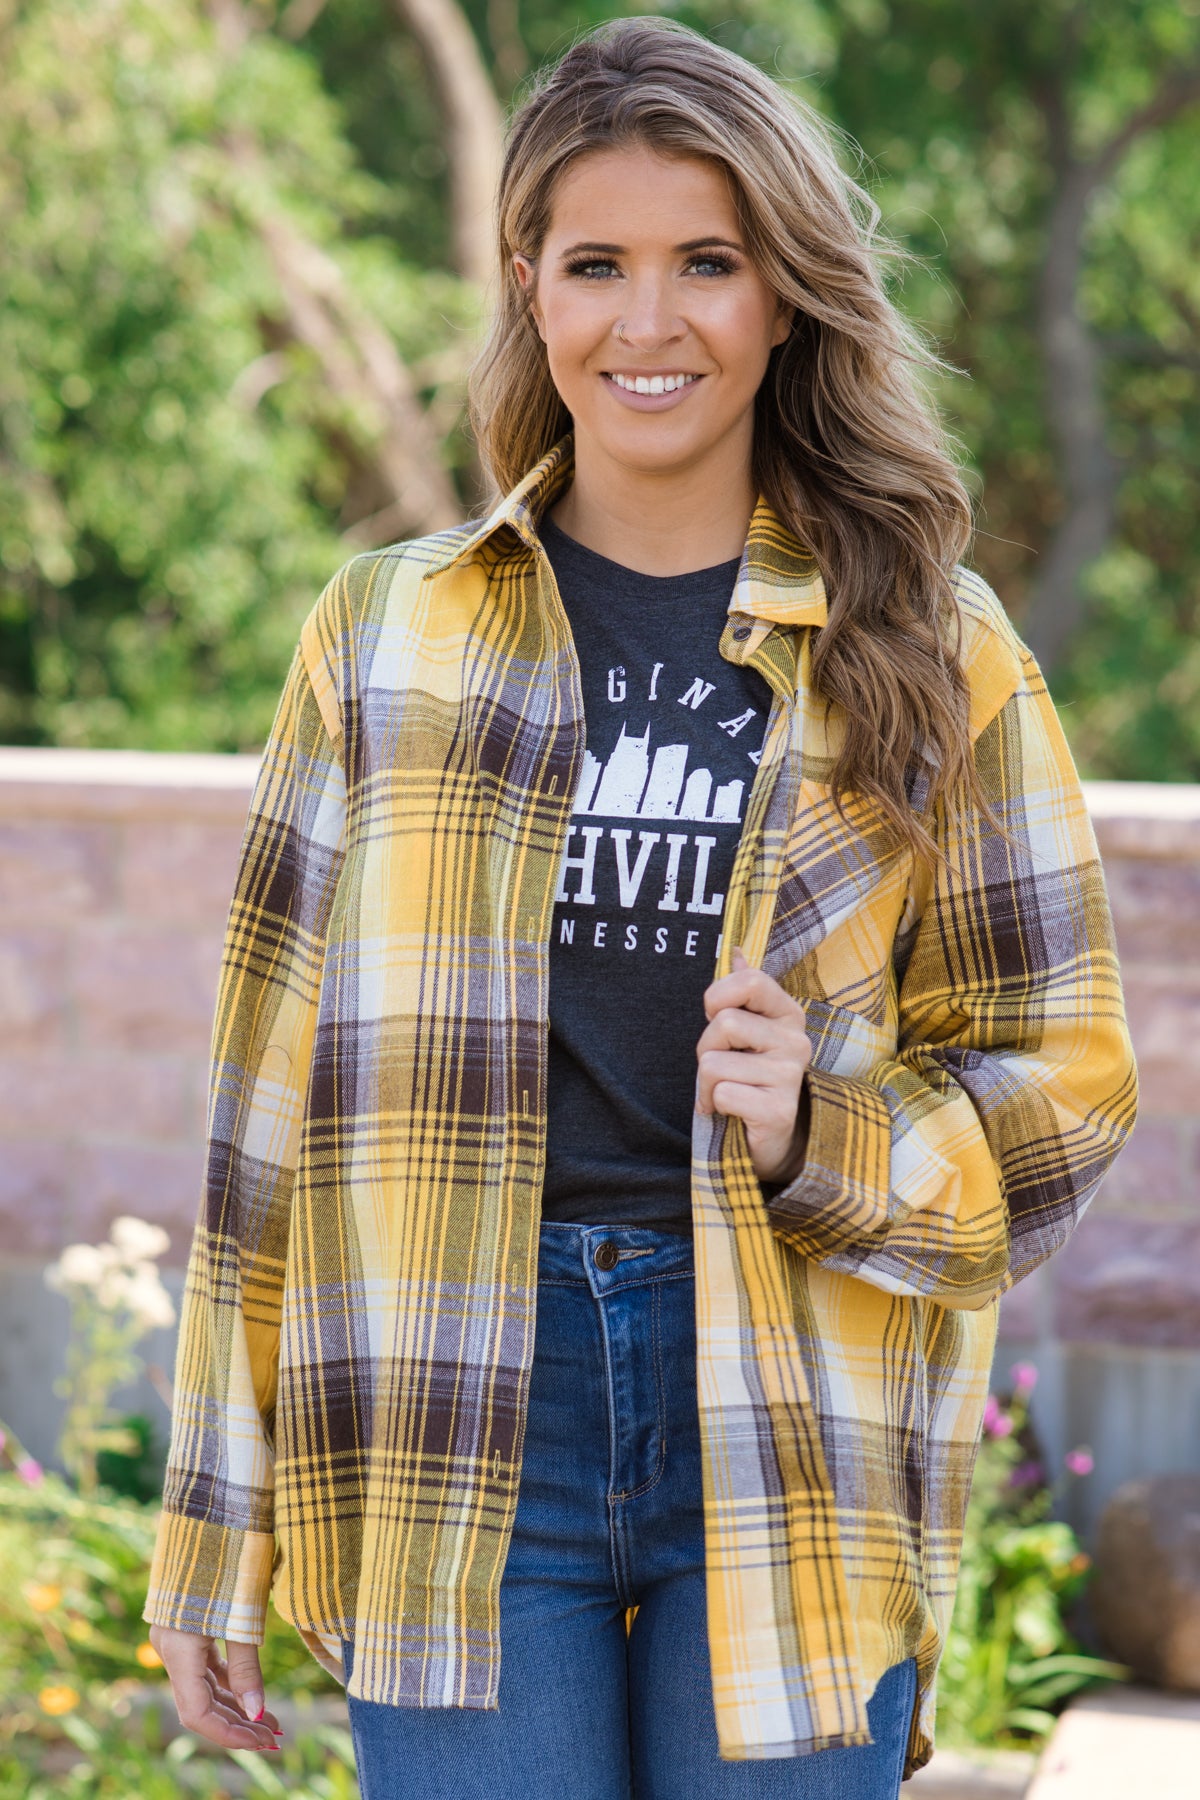 Mustard and Mocha Plaid Button Up Top - Filly Flair